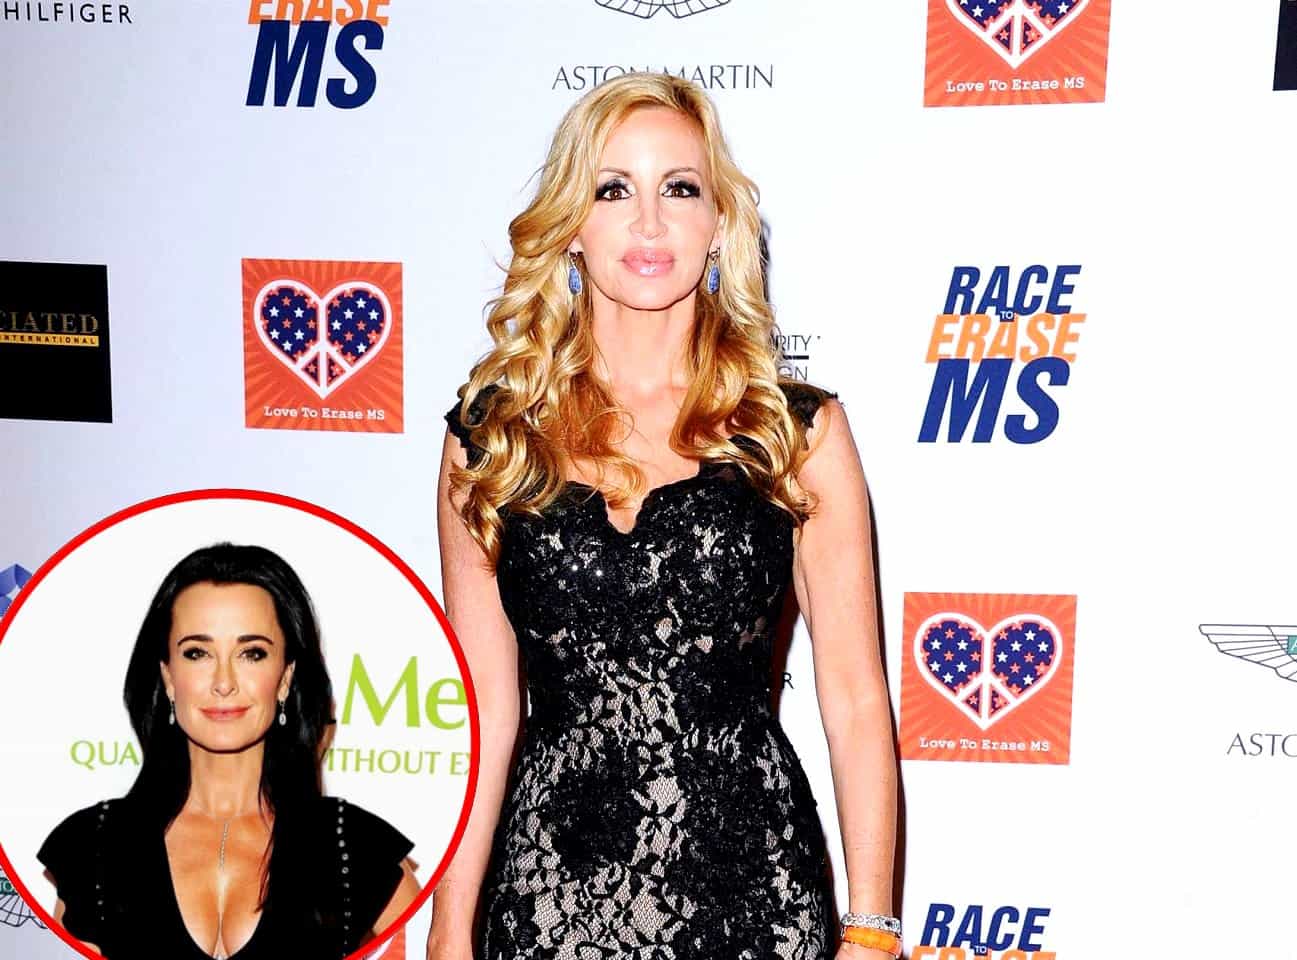 Is Camille Grammer Skipping the RHOBH Reunion? Plus She Slams Kyle Richards as 'Creepy' and Says She's the 'New Target'